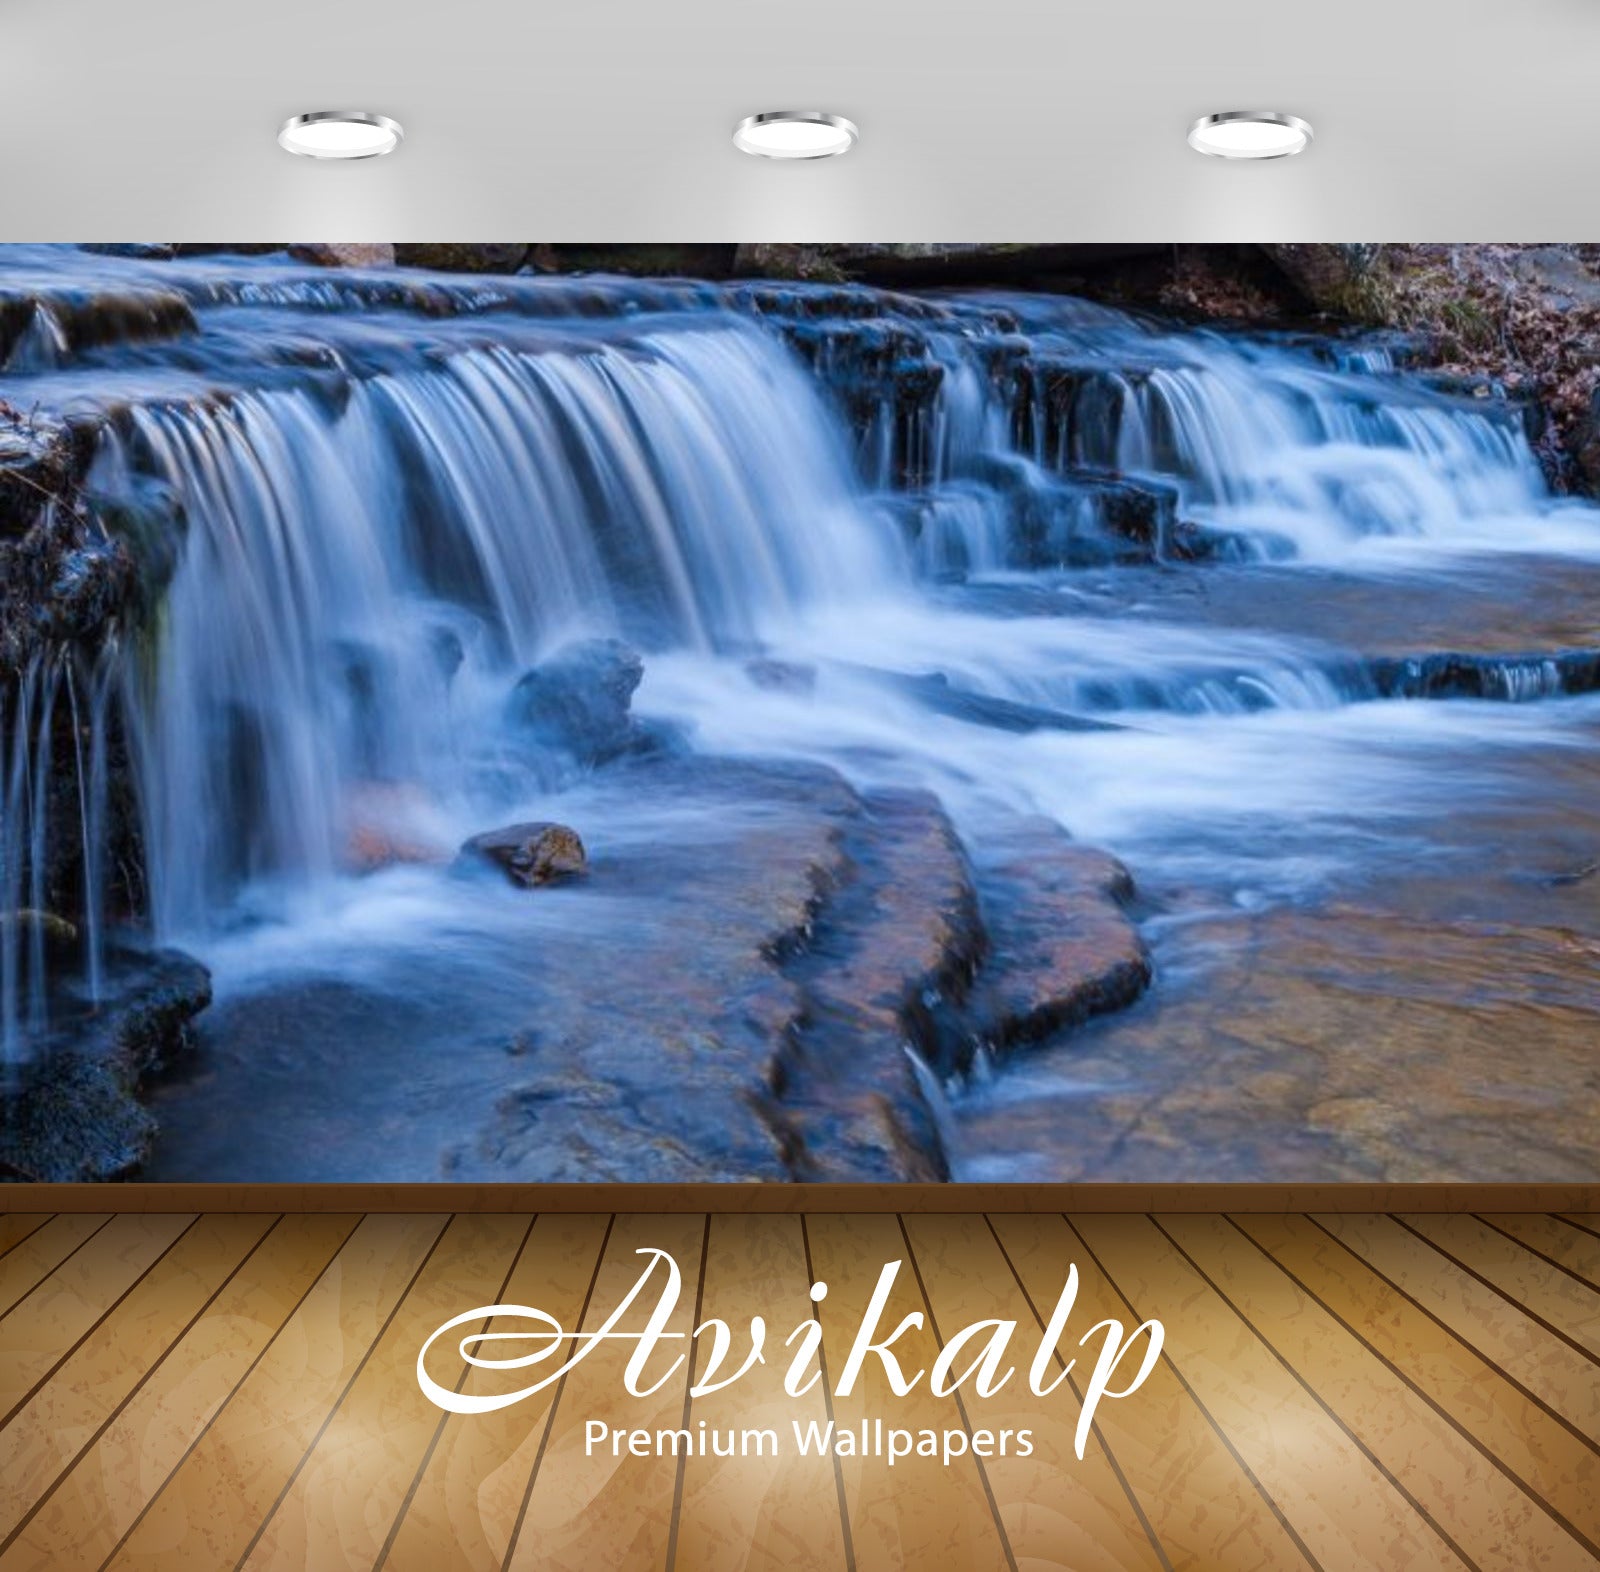 Avikalp Exclusive Awi2051 Cascading Waterfalls Collins Creek At Heber Springs Arkansas State Park  F